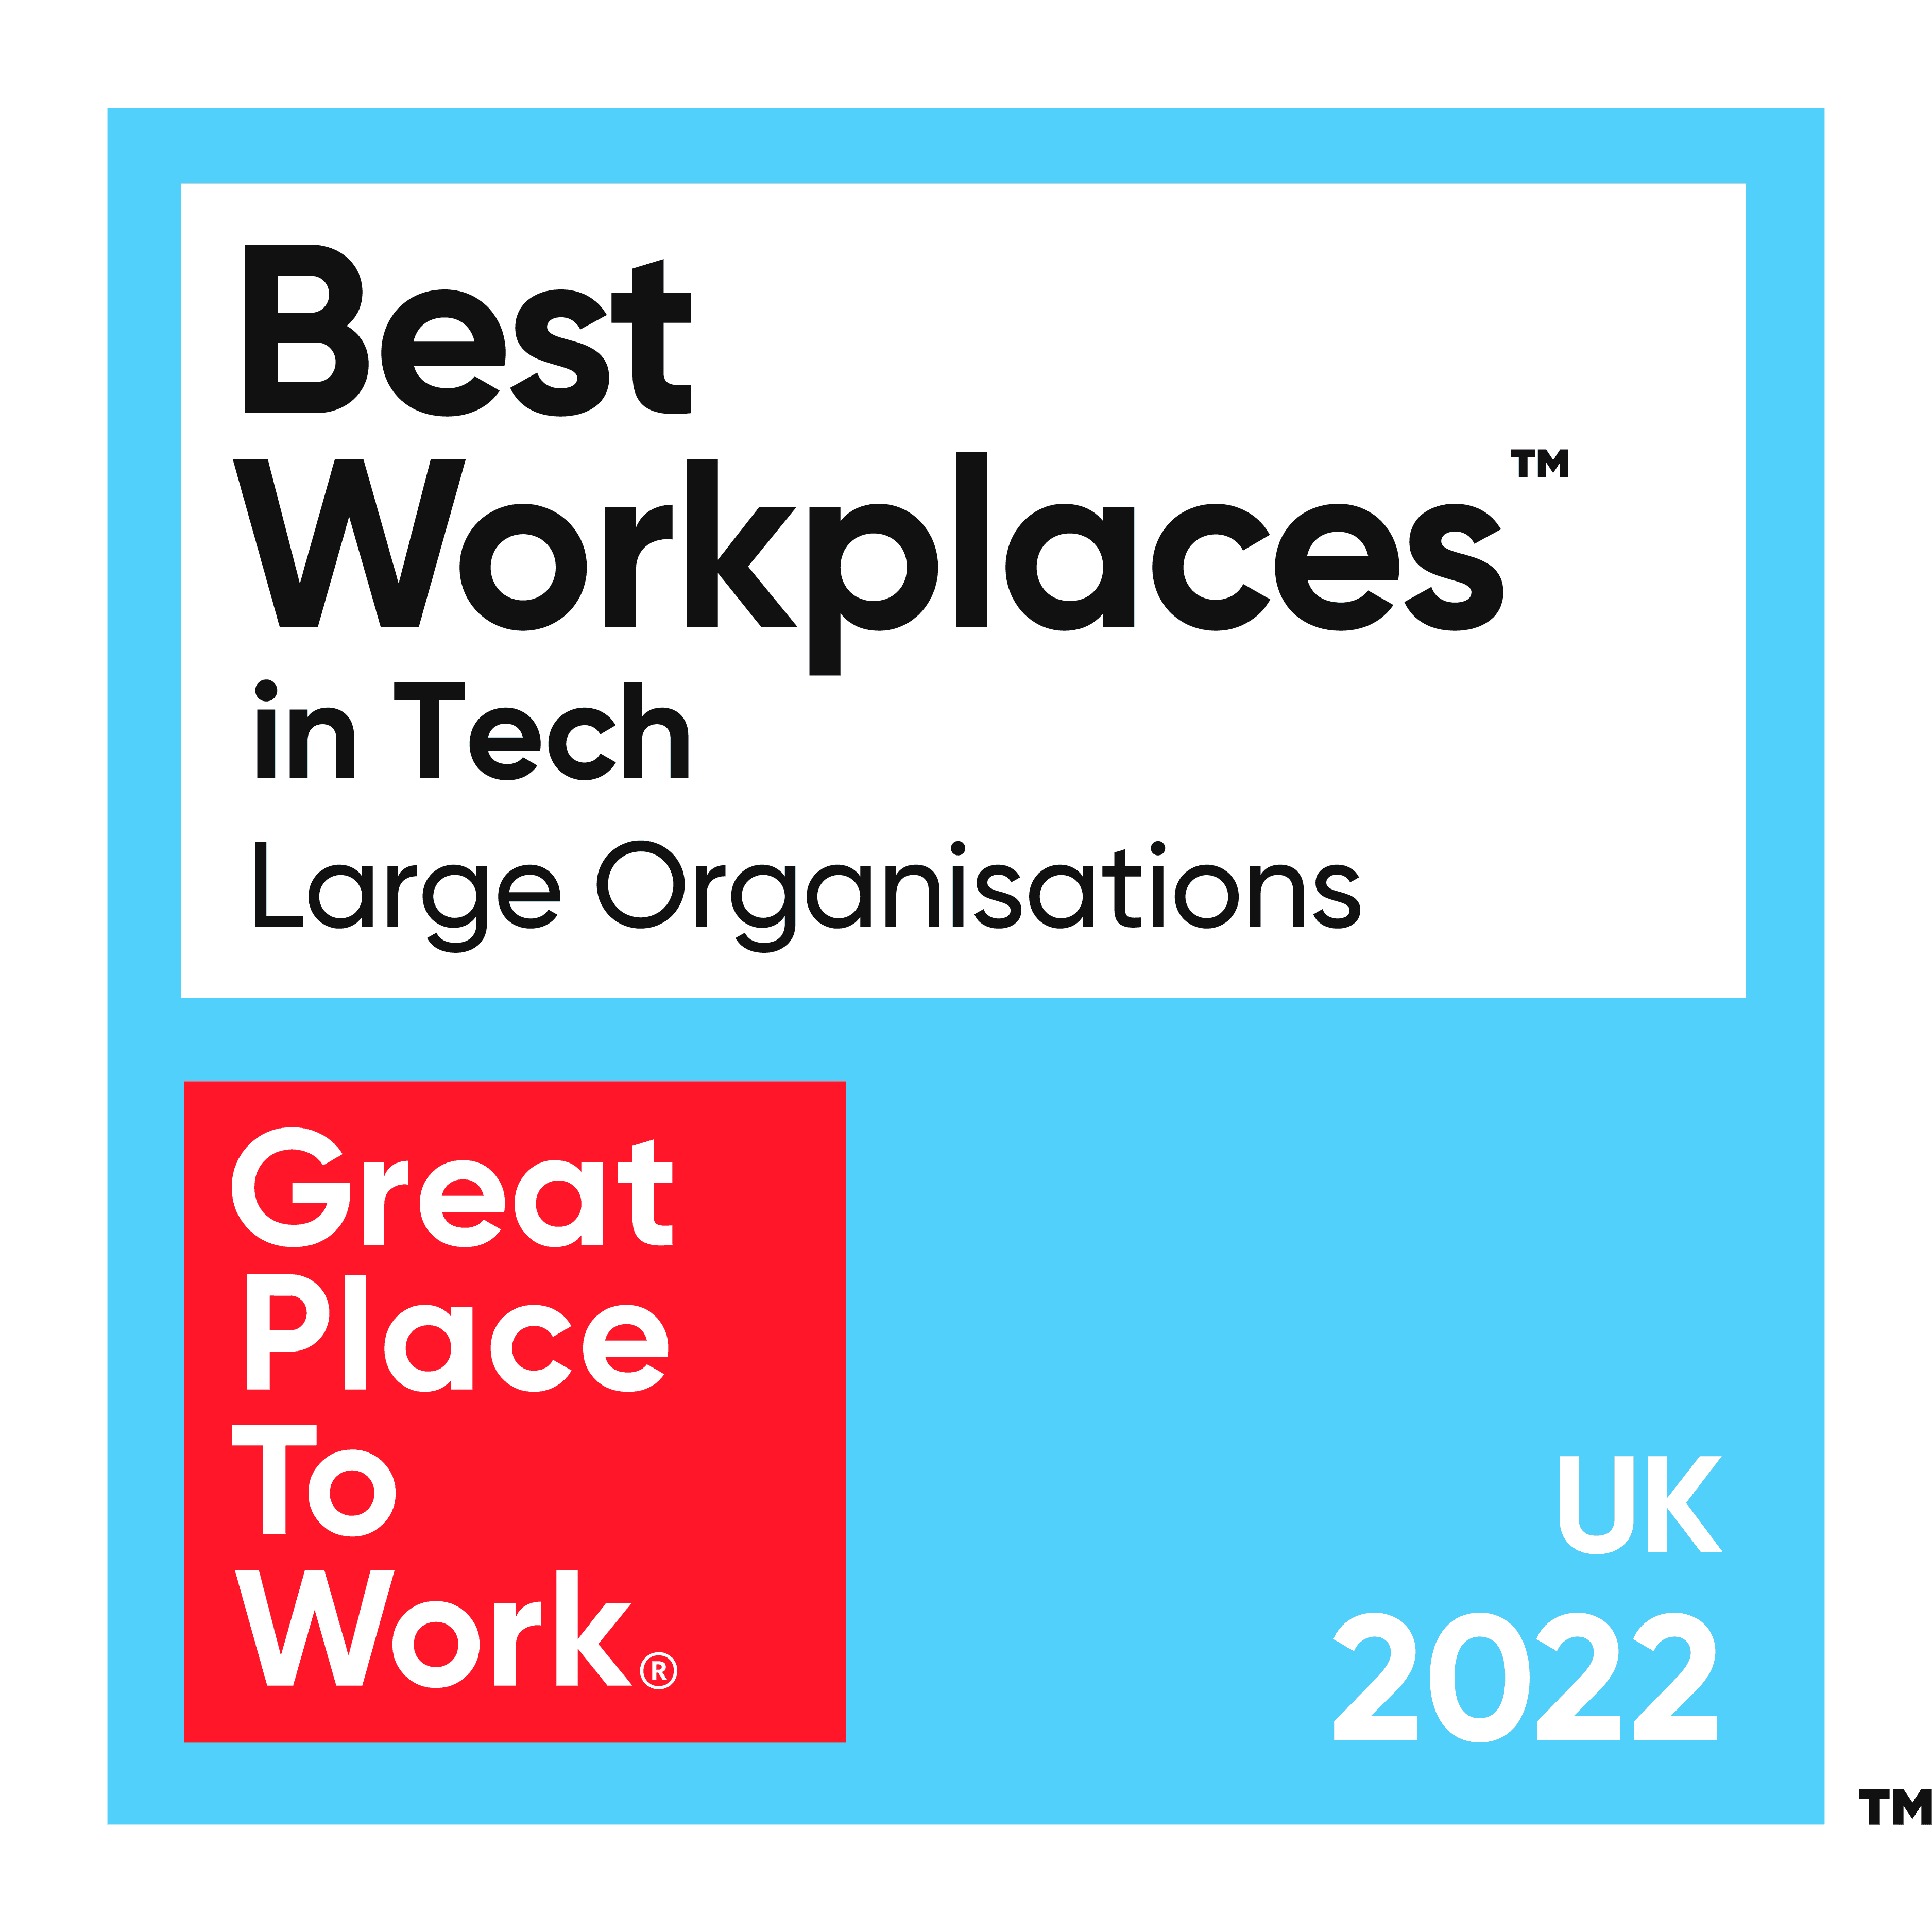 Best Workplaces for the category Medium Organisations awarded by Great Place To Work.